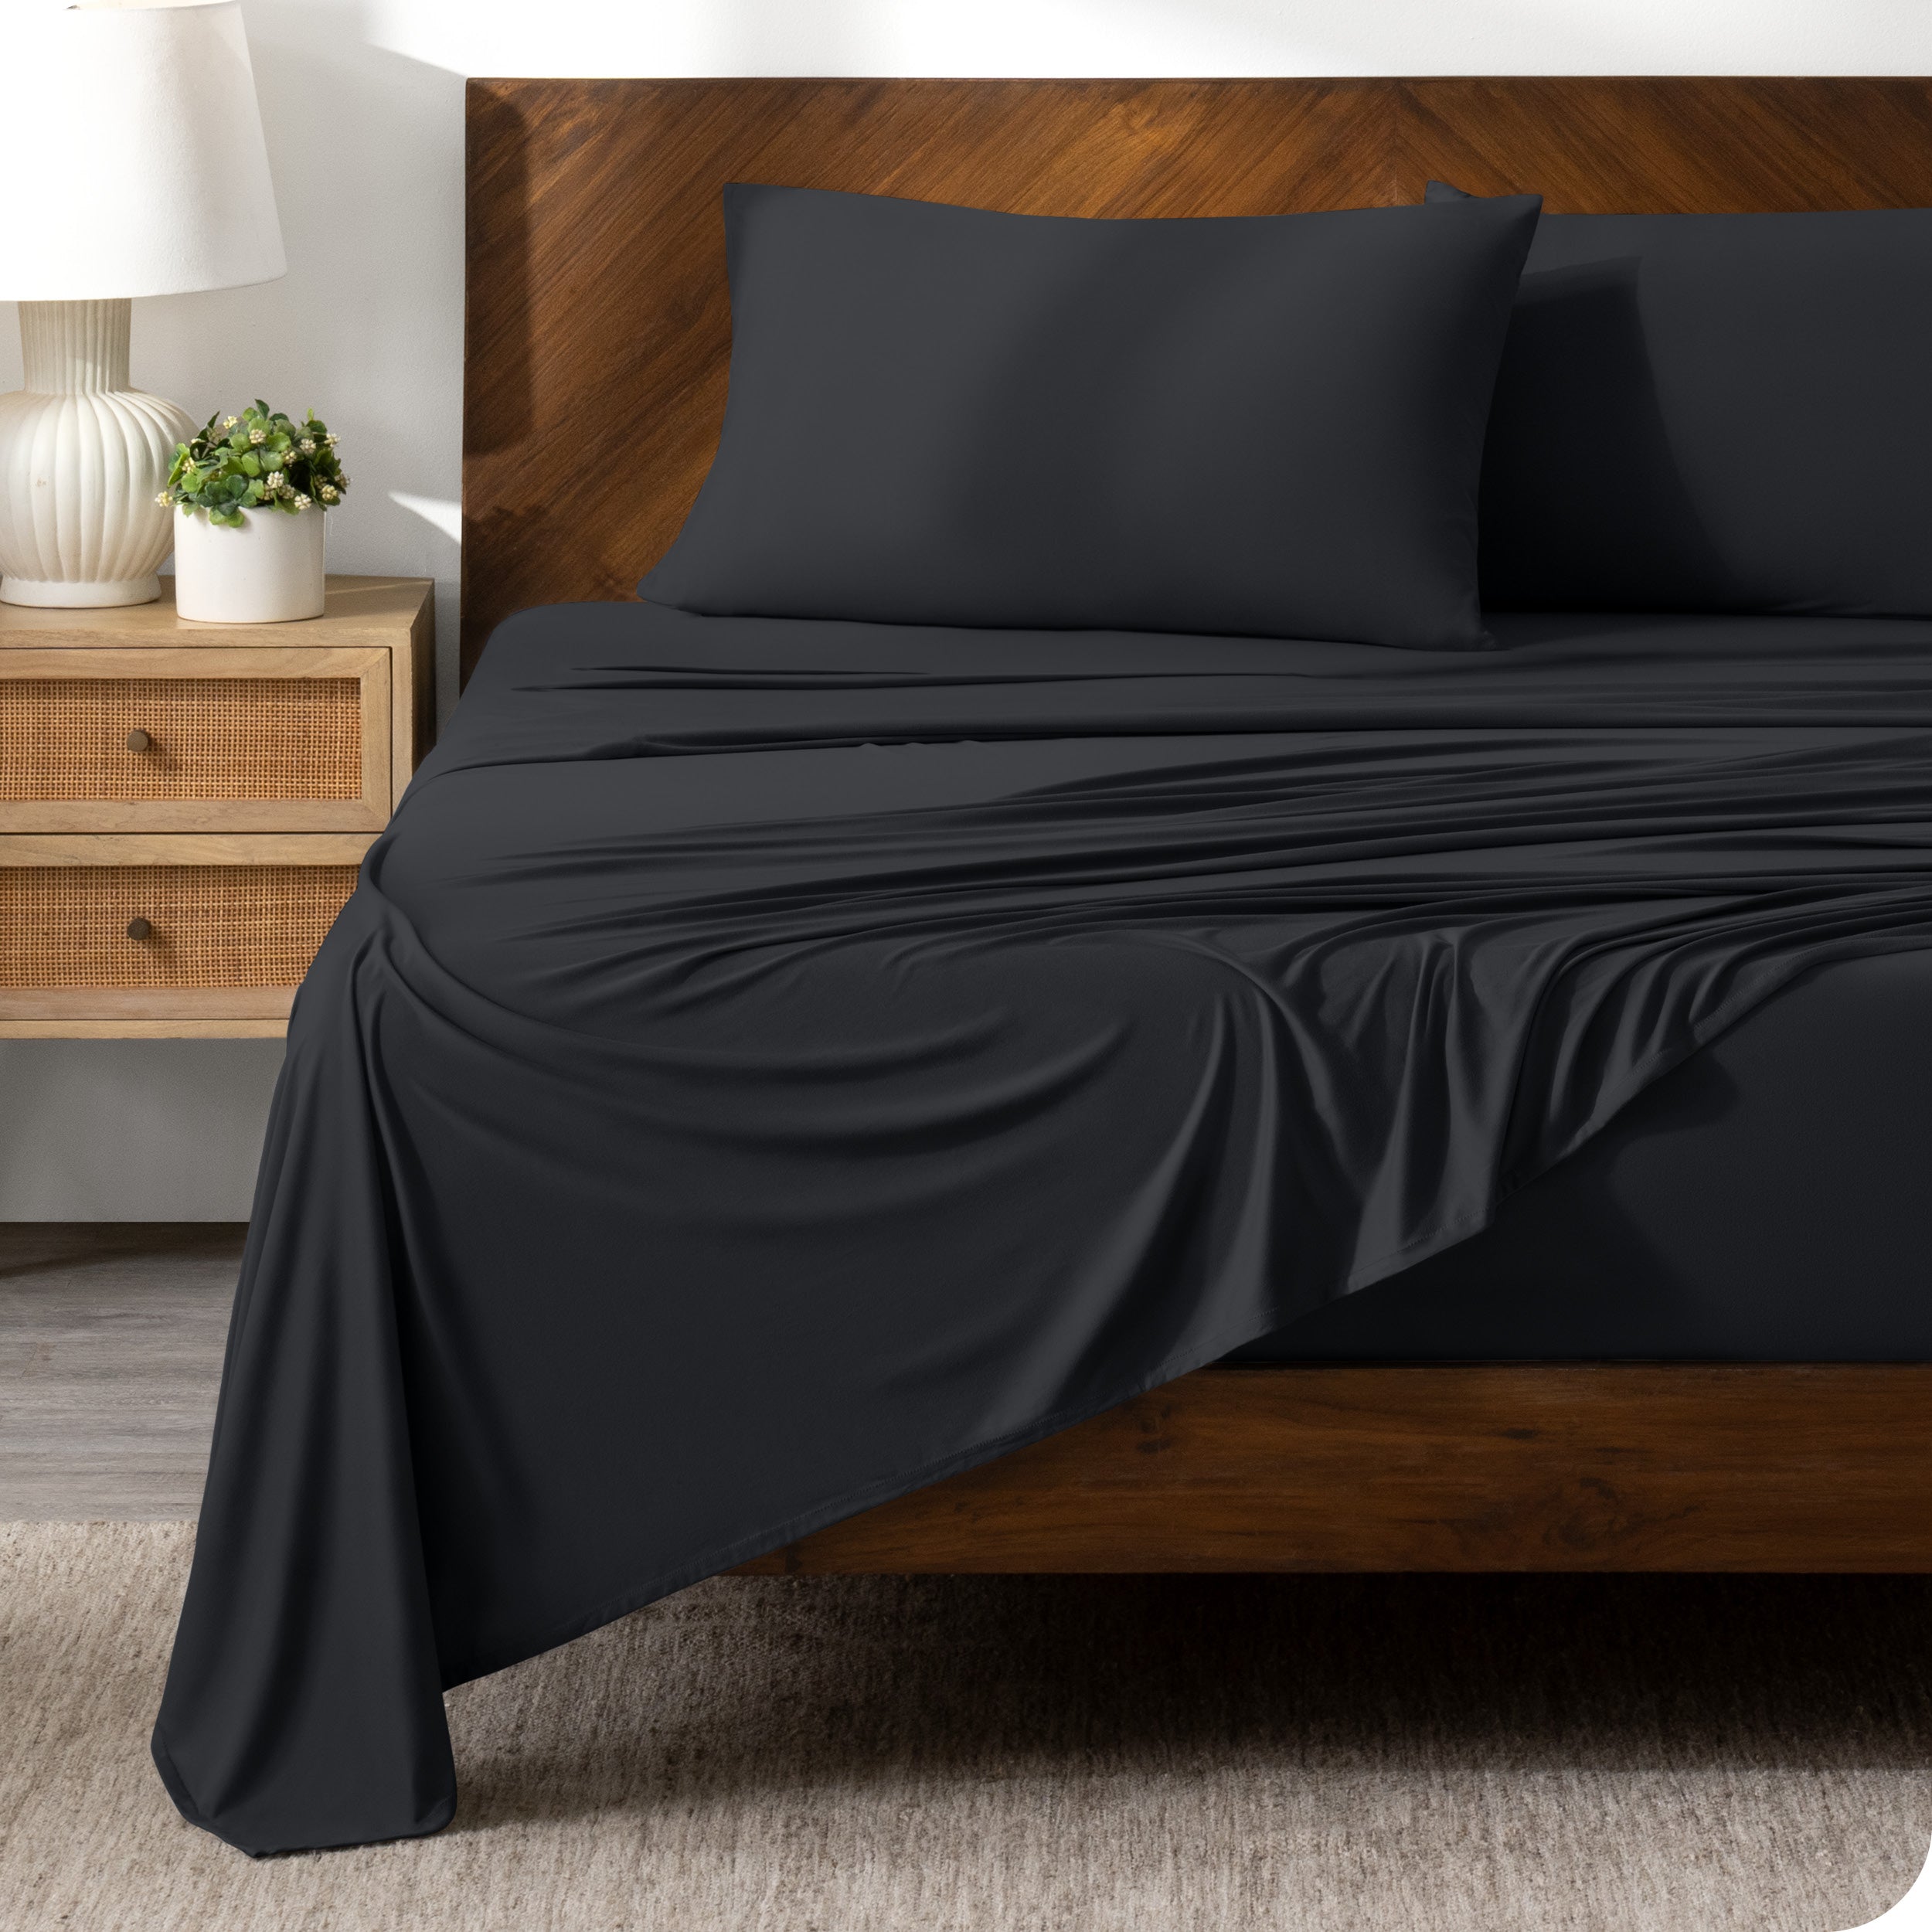 Black sheet set on a bed with a dark wooden bed frame